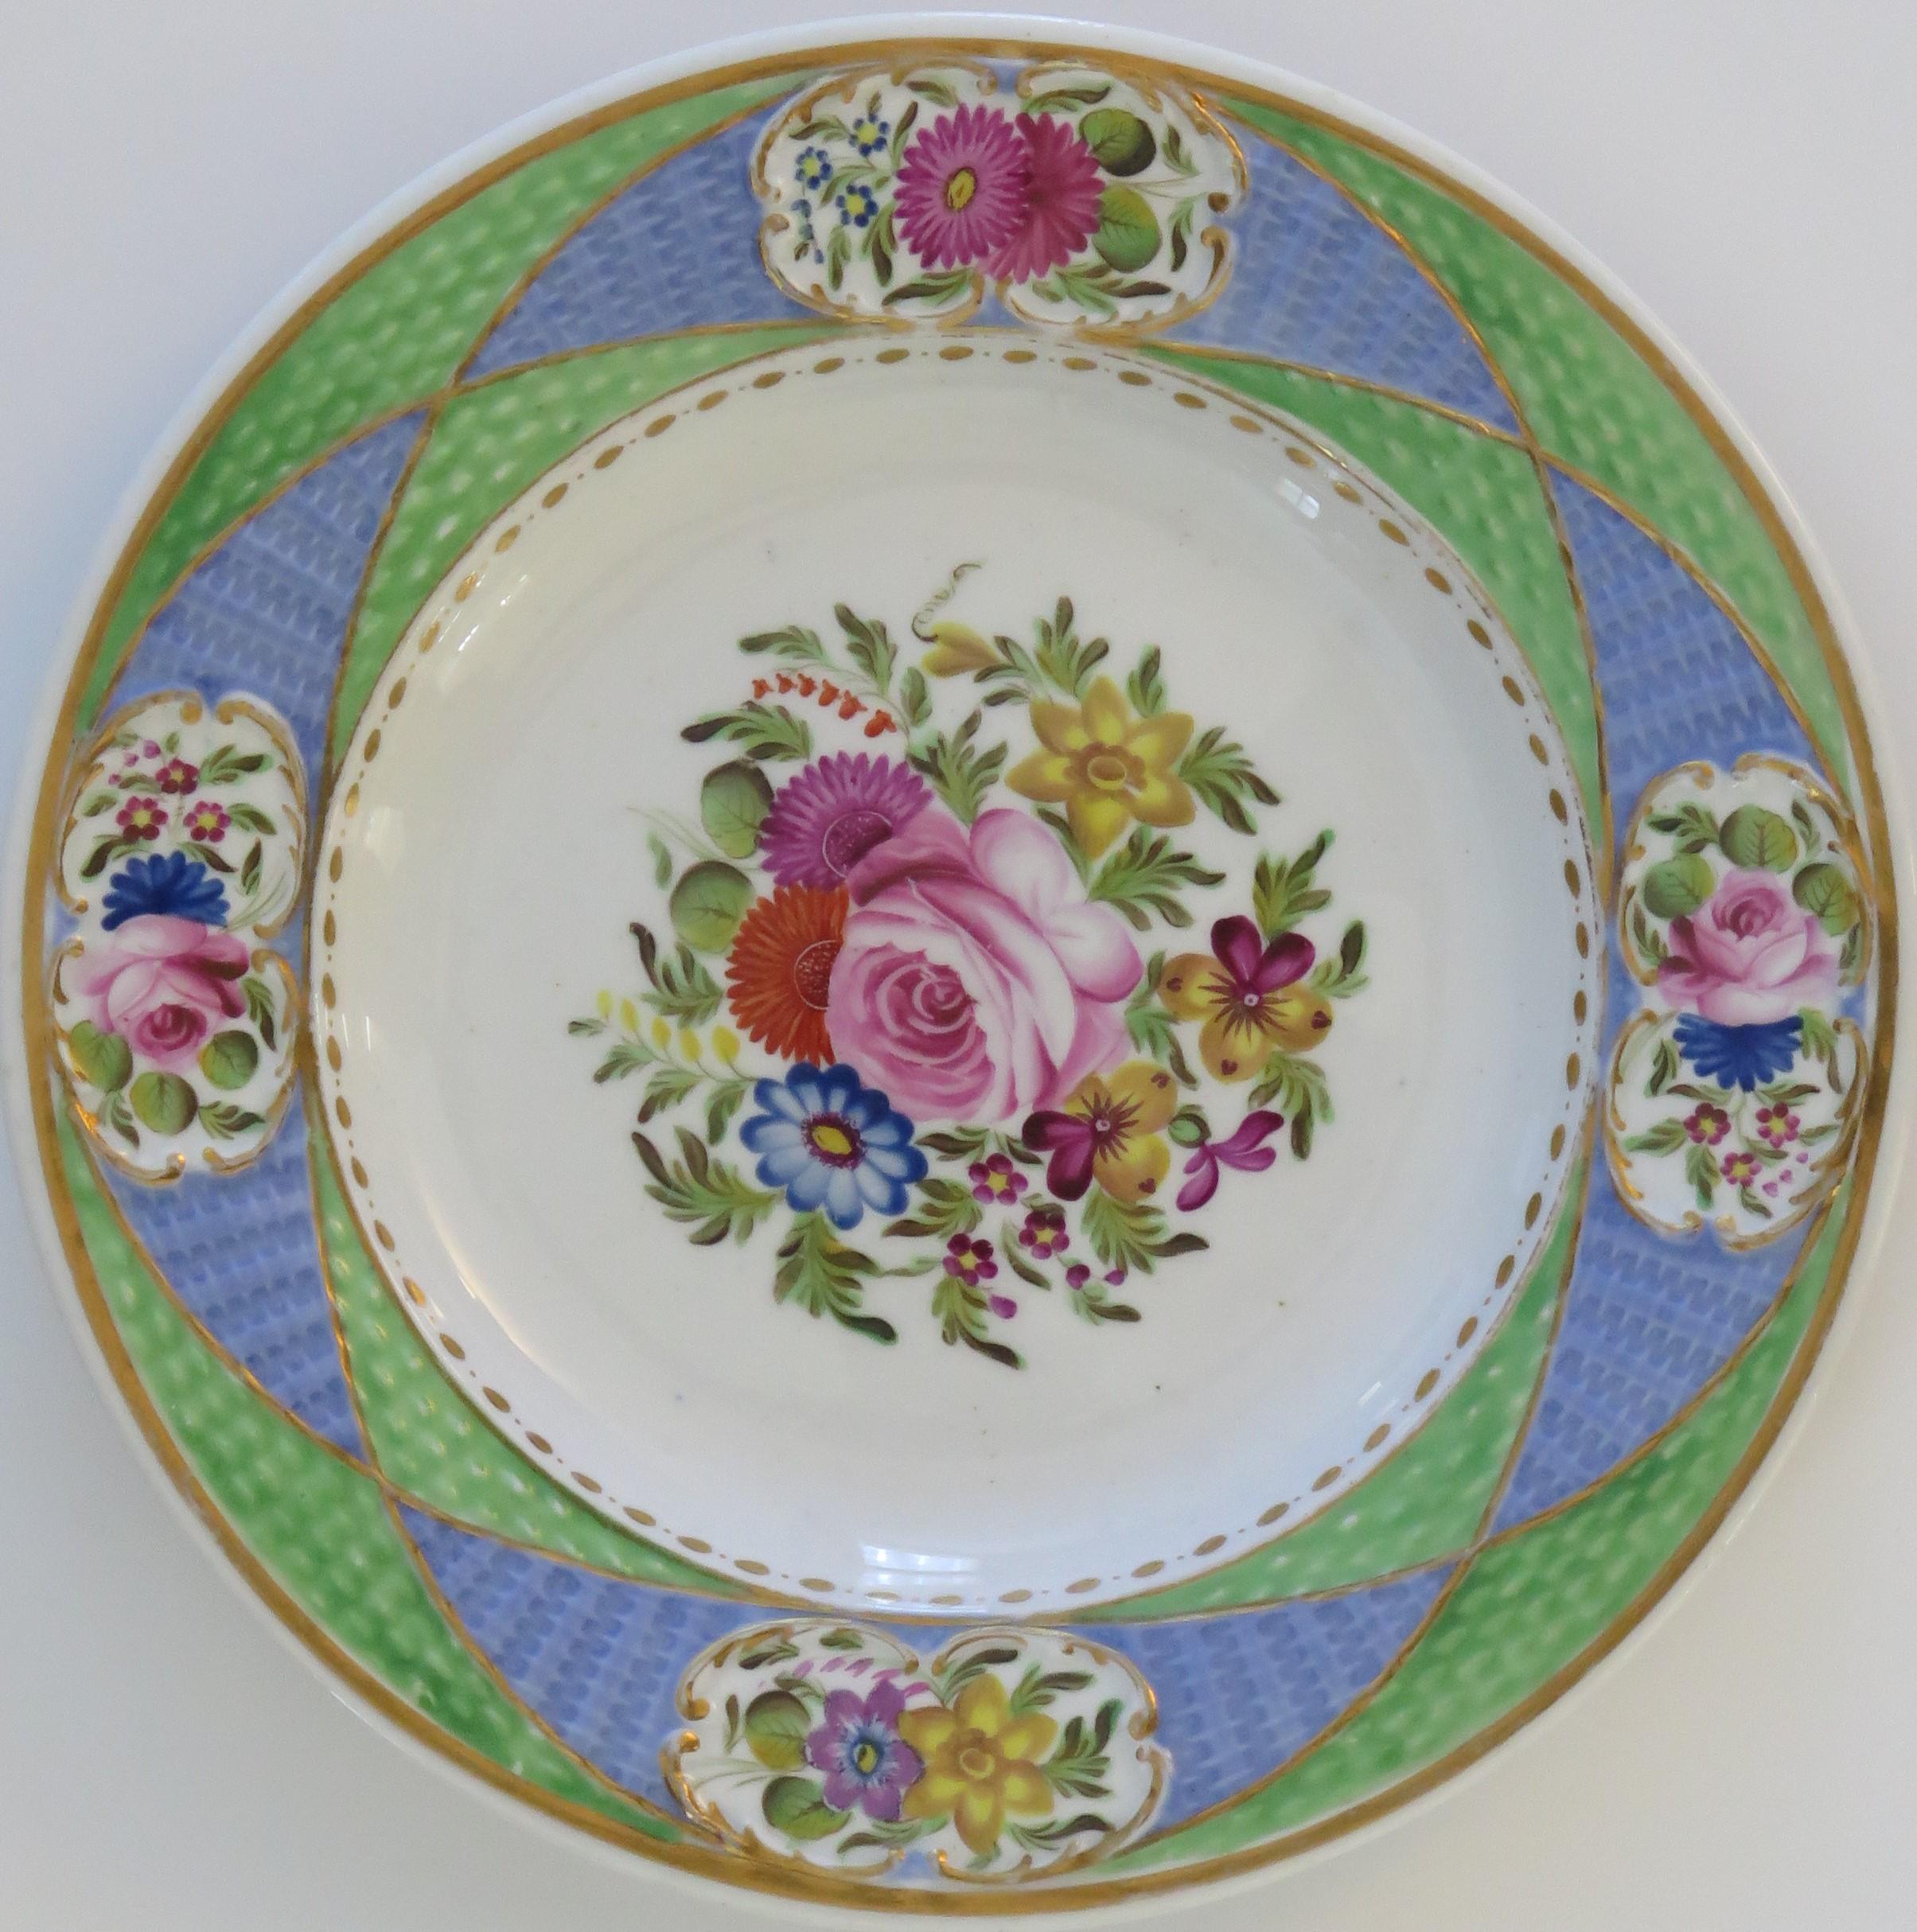 This is a beautiful desert plate by Newhall, dating to the turn of the early 19th century, Georgian period, circa 1820.

The piece is very well potted on a low foot and a moulded basket work border to the cavetto.

The plate is finely hand